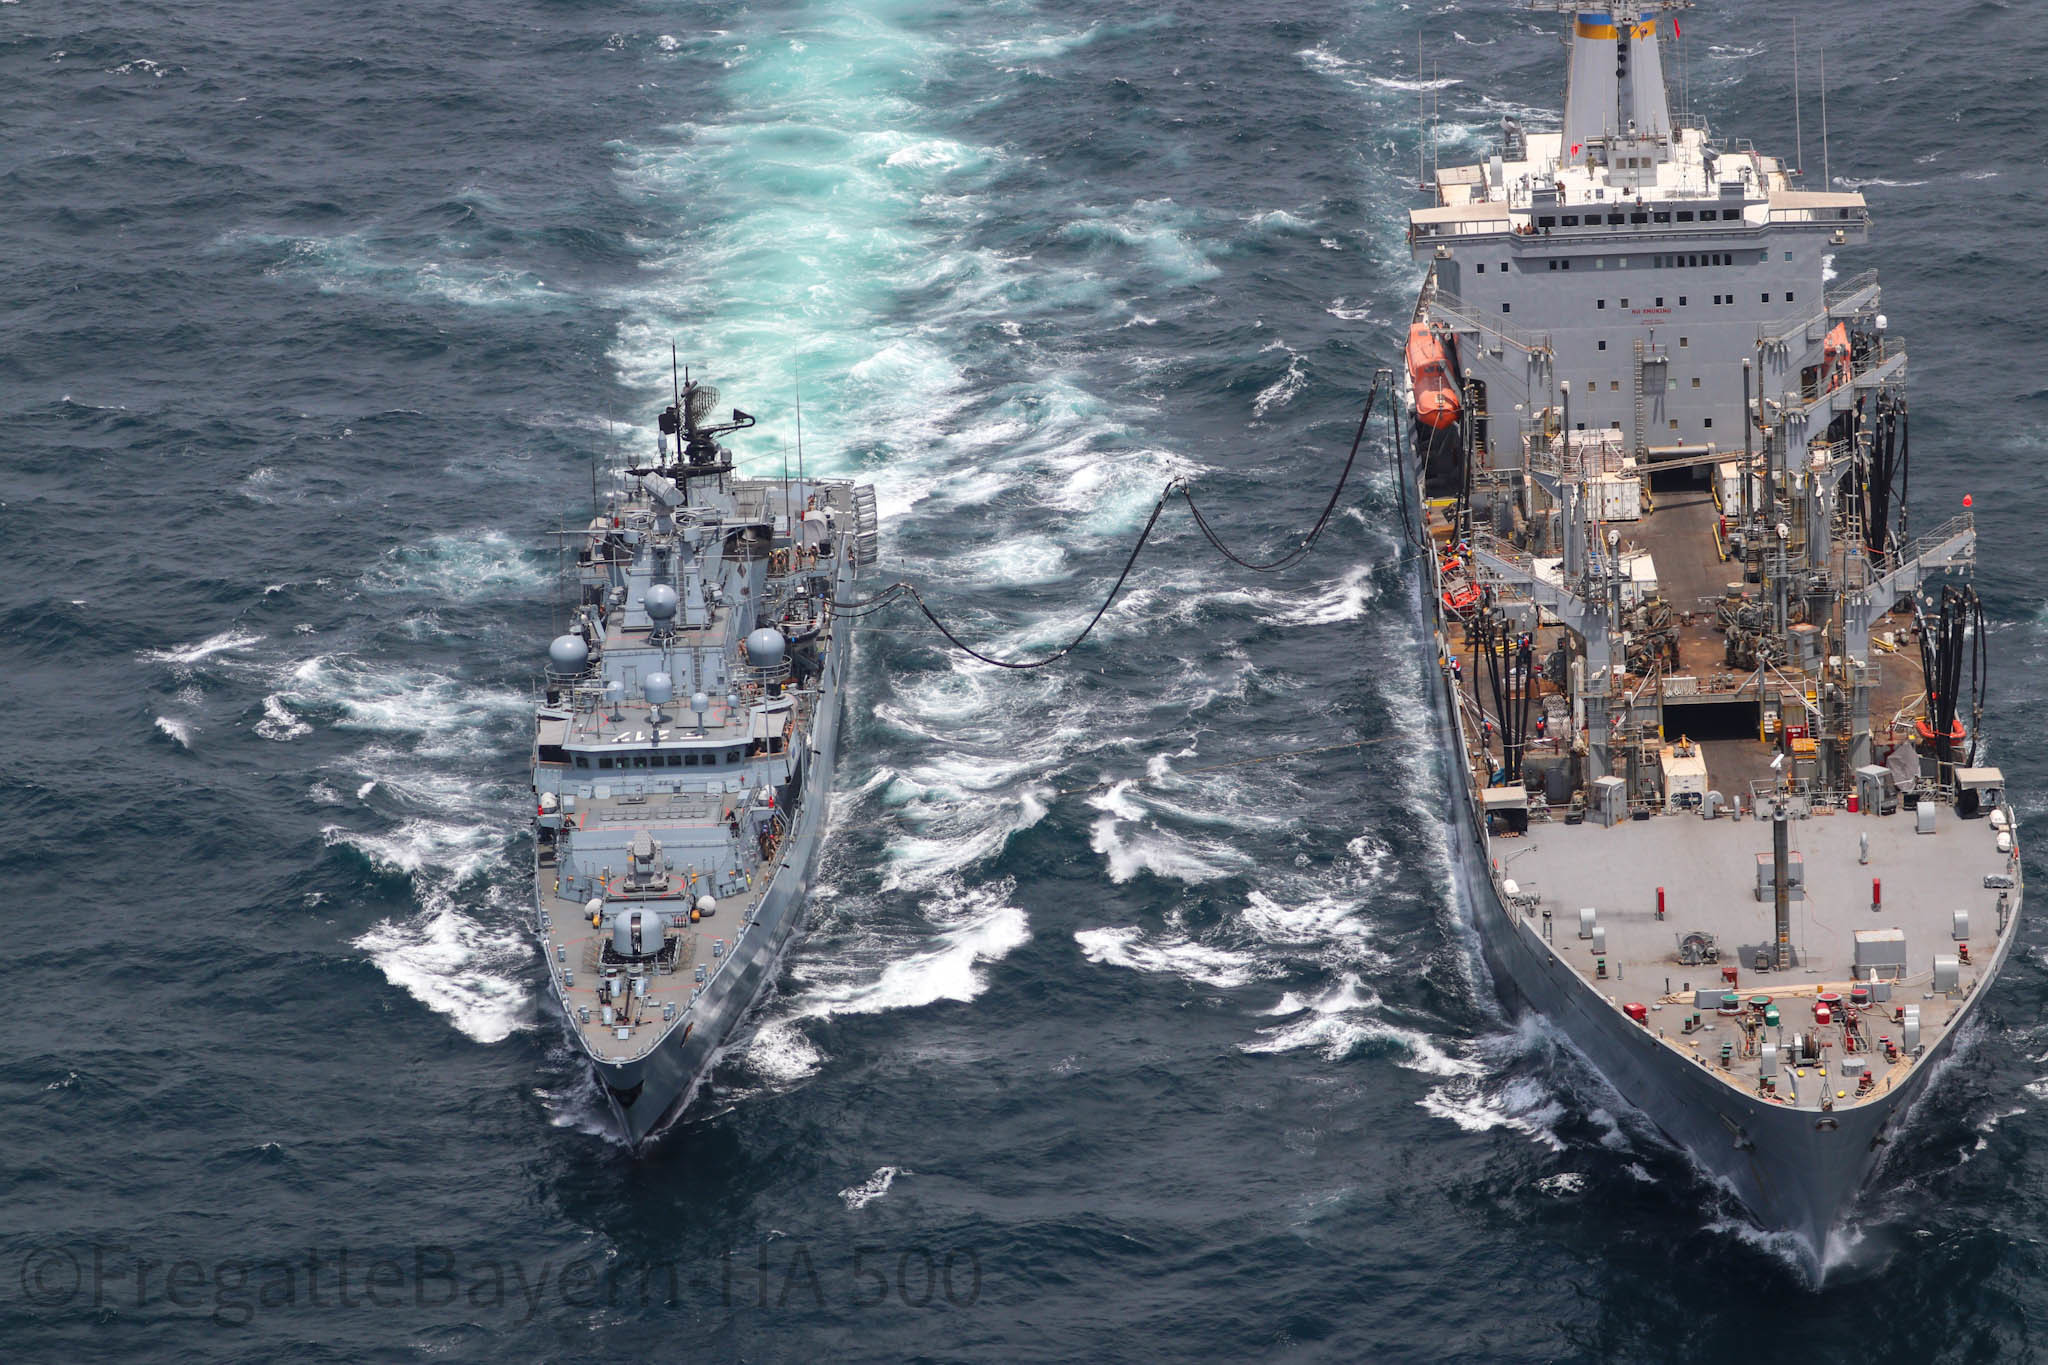 USNS John Lenthall (T-AO 189) provides replenishment services to F 217 FGS Bayern, a Brandenburg-class frigate of the German Navy, during its five-month deployment overseas.